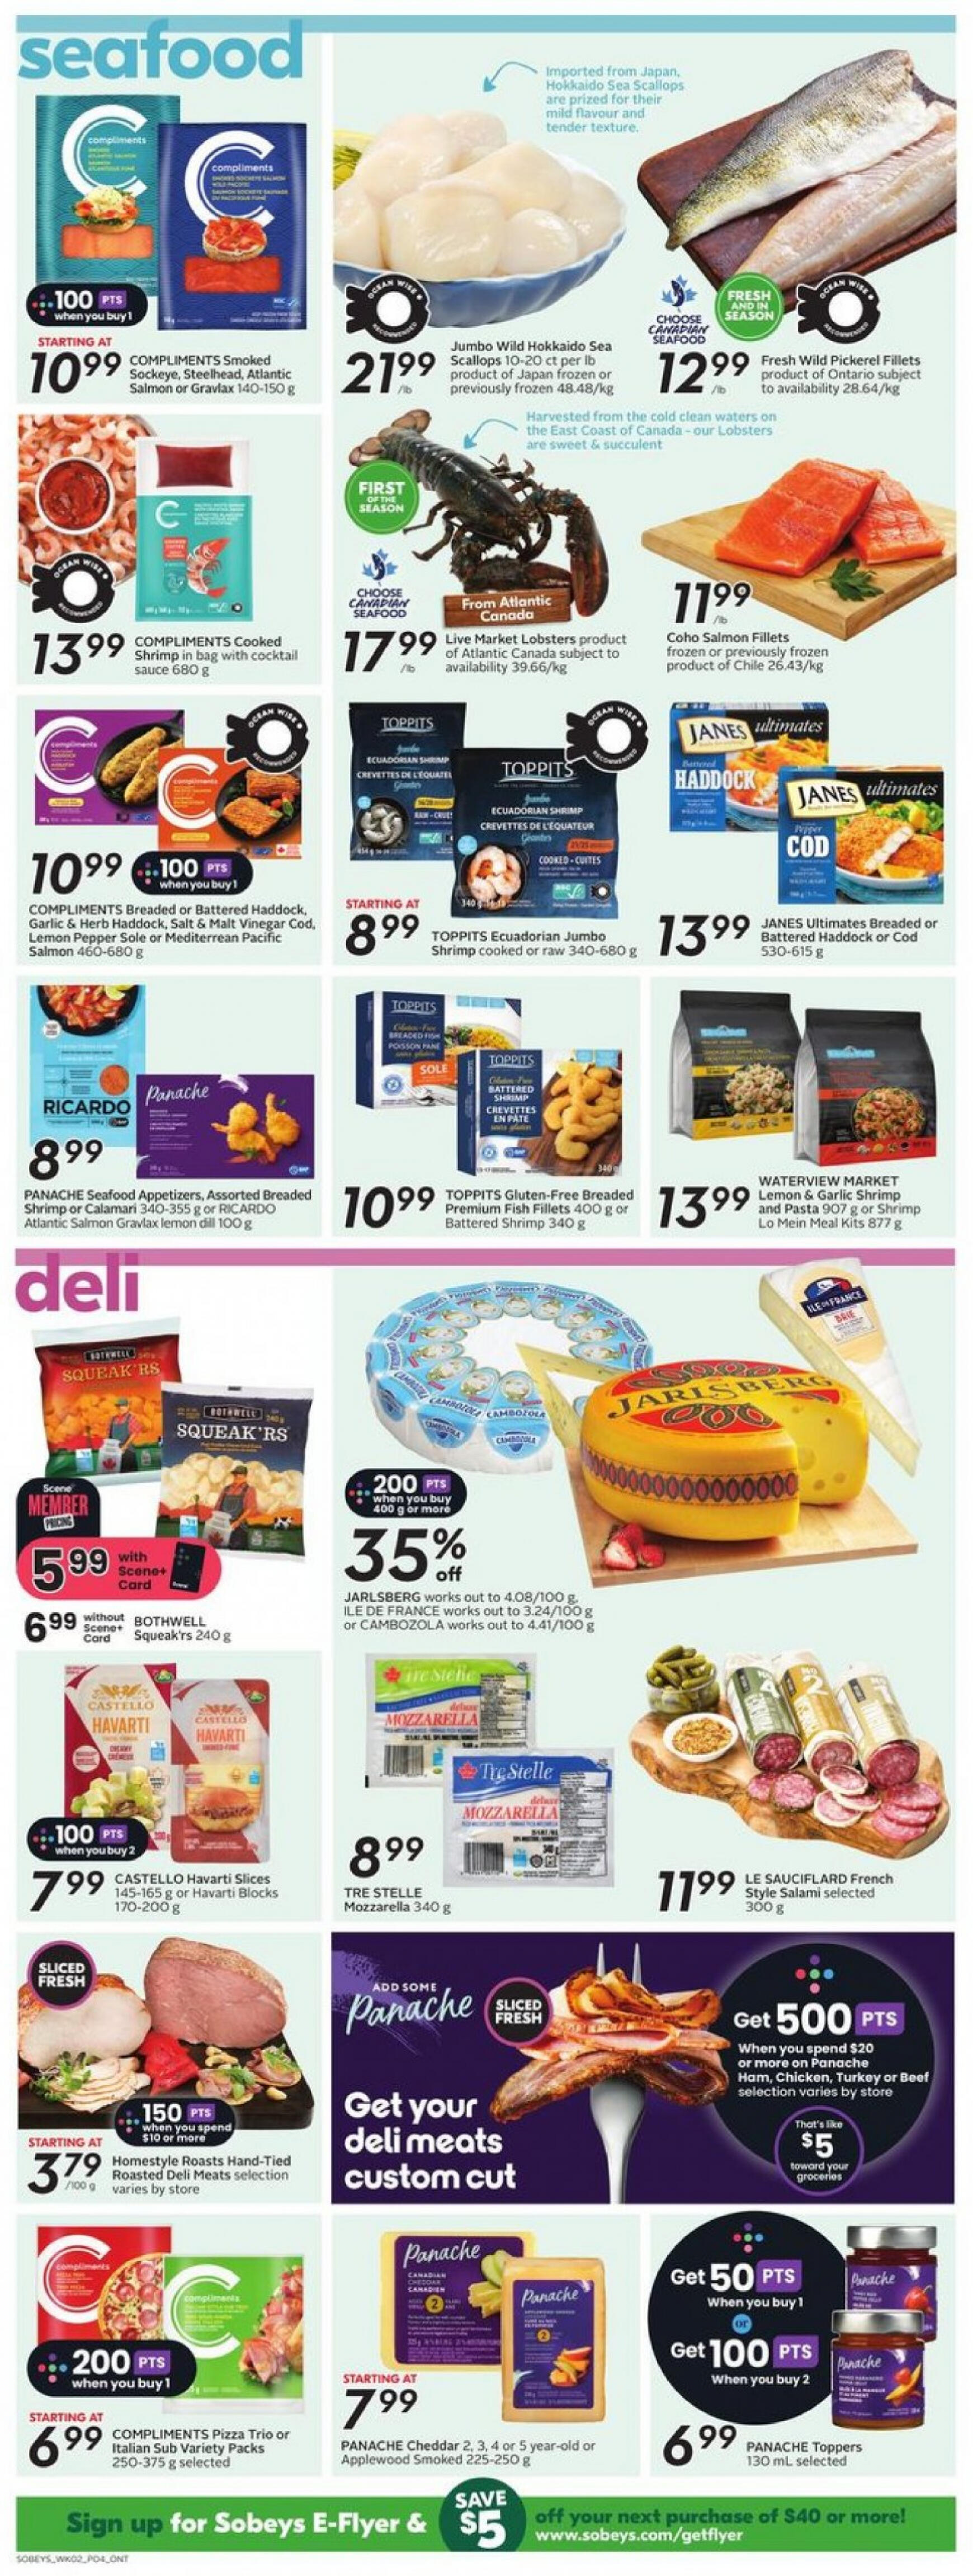 sobeys - Sobeys - Weekly Flyer - Ontario flyer current 09.05. - 15.05. - page: 9